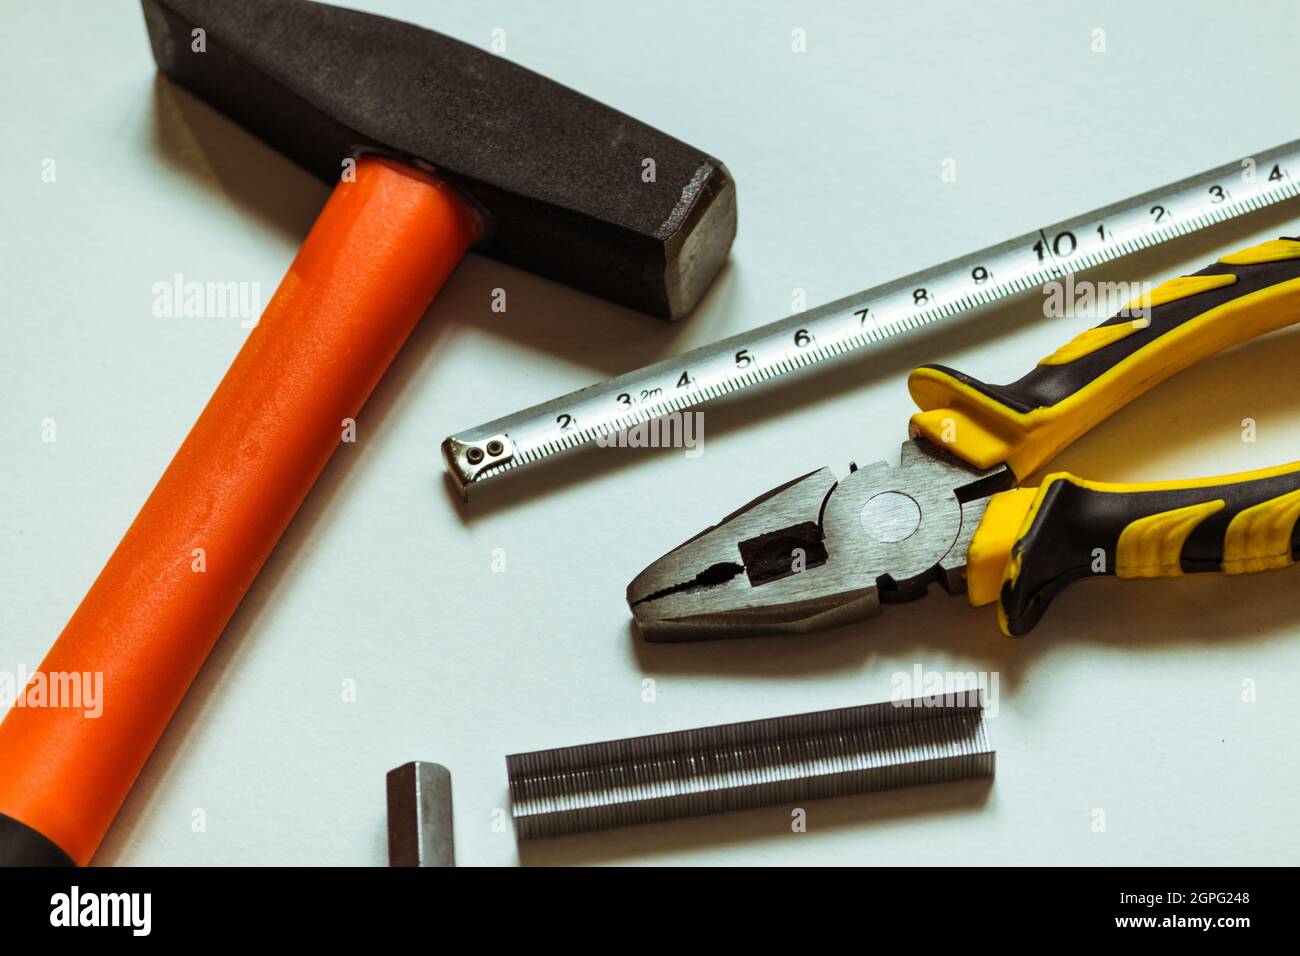 A set of metal hex keys next to a hammer, pliers and a tape measure. Stock Photo